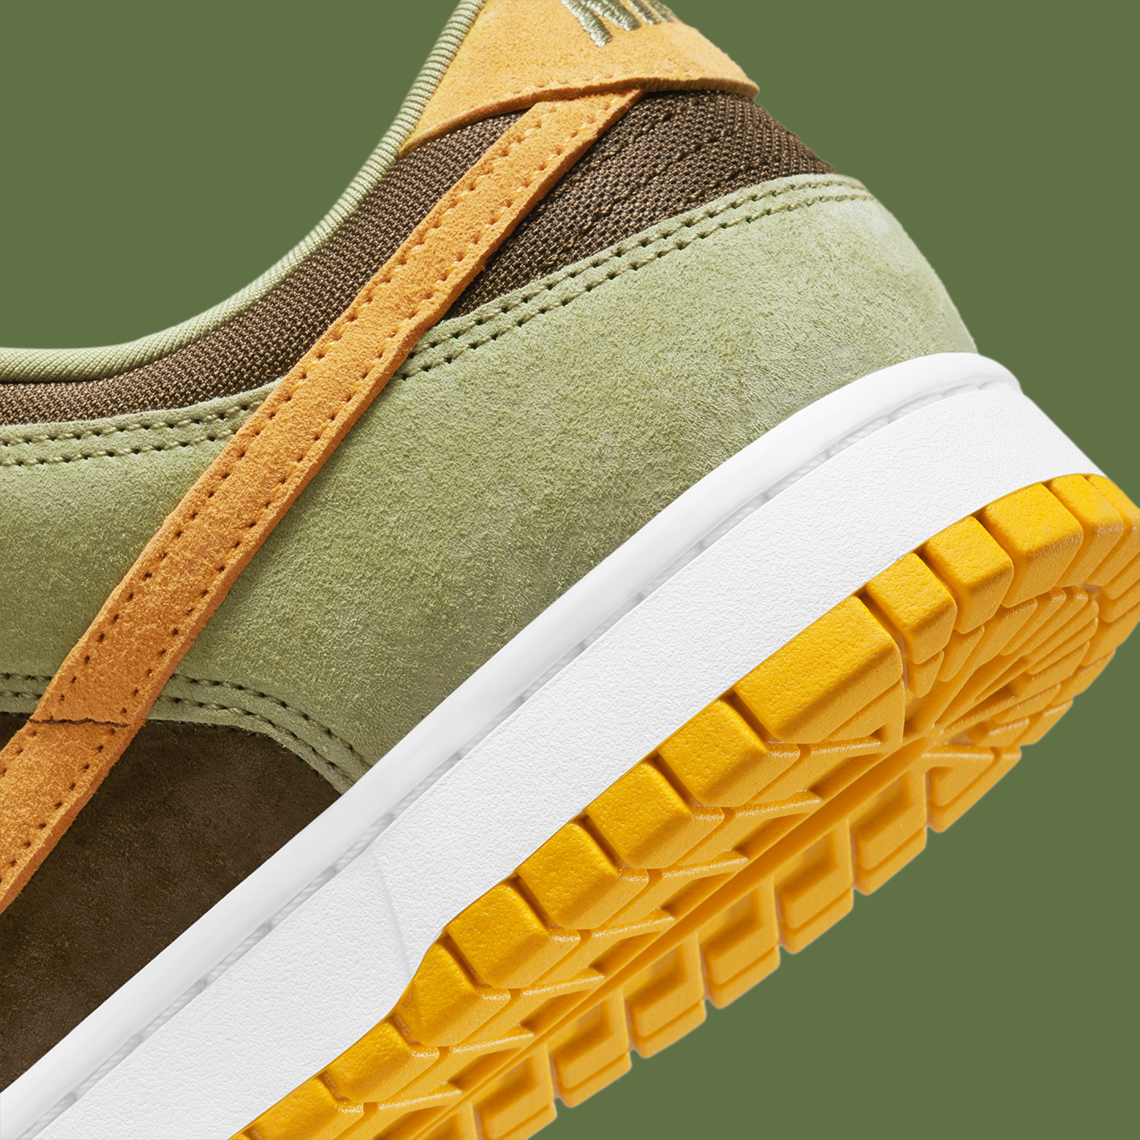 Nike Dunk Low SE Dusty Olive/Pro Gold DH5360-300 – NOMAD